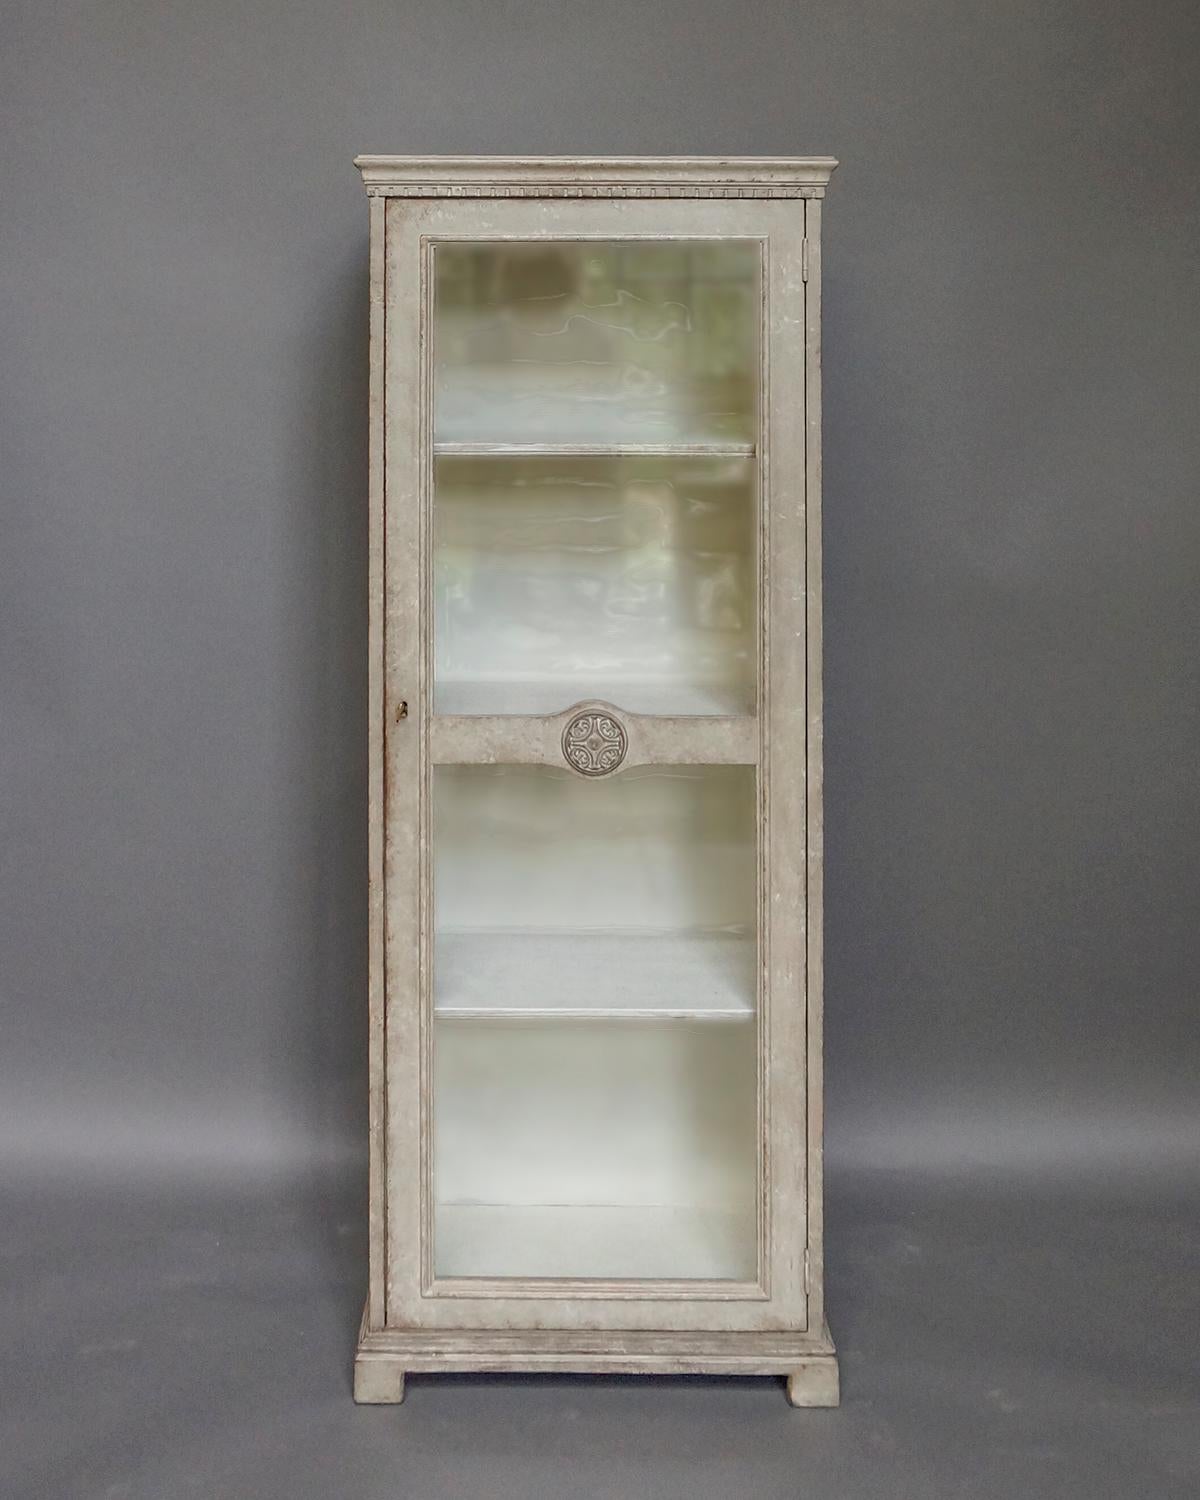 Gustavian Style Vitrine, Sweden, circa 1910. The single door has two glass panels separated by a horizontal member with a beautifully carved roundel. Shaped cornice with dentil molding and simple bracket base. Three internal shelves.